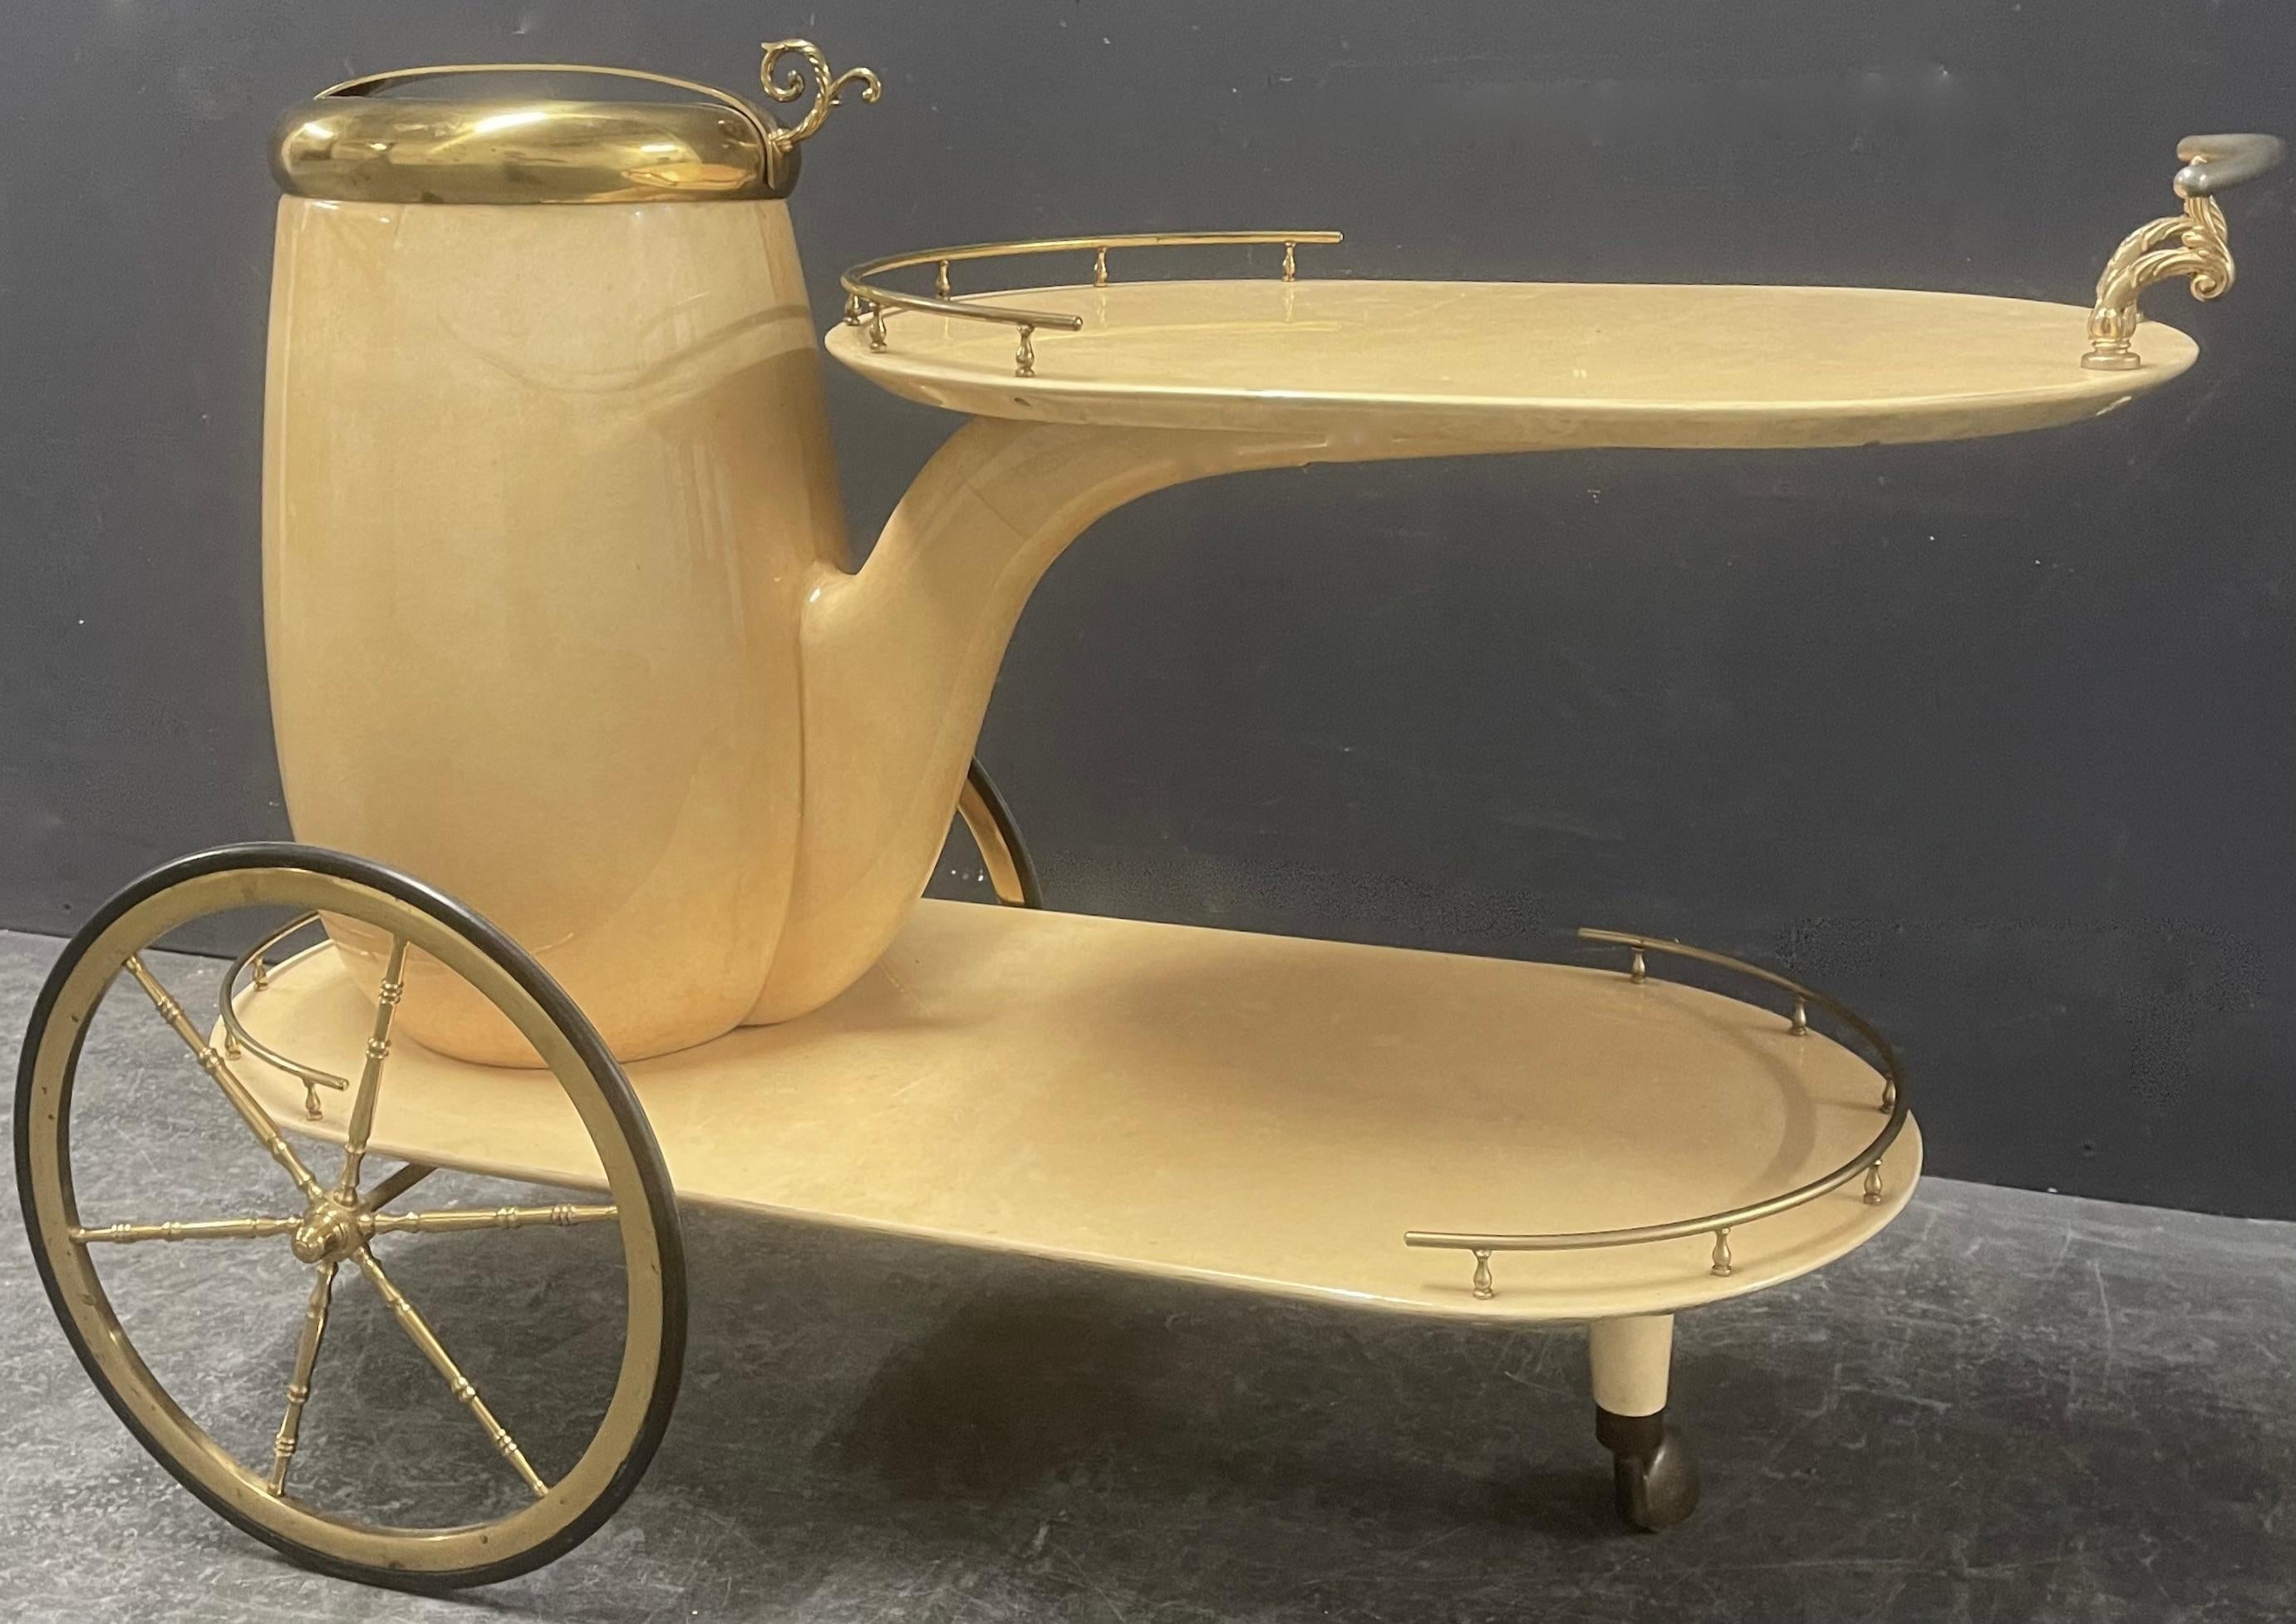 Iconic Aldo Tura Champagne cooler bar cart In Good Condition For Sale In Munich, DE